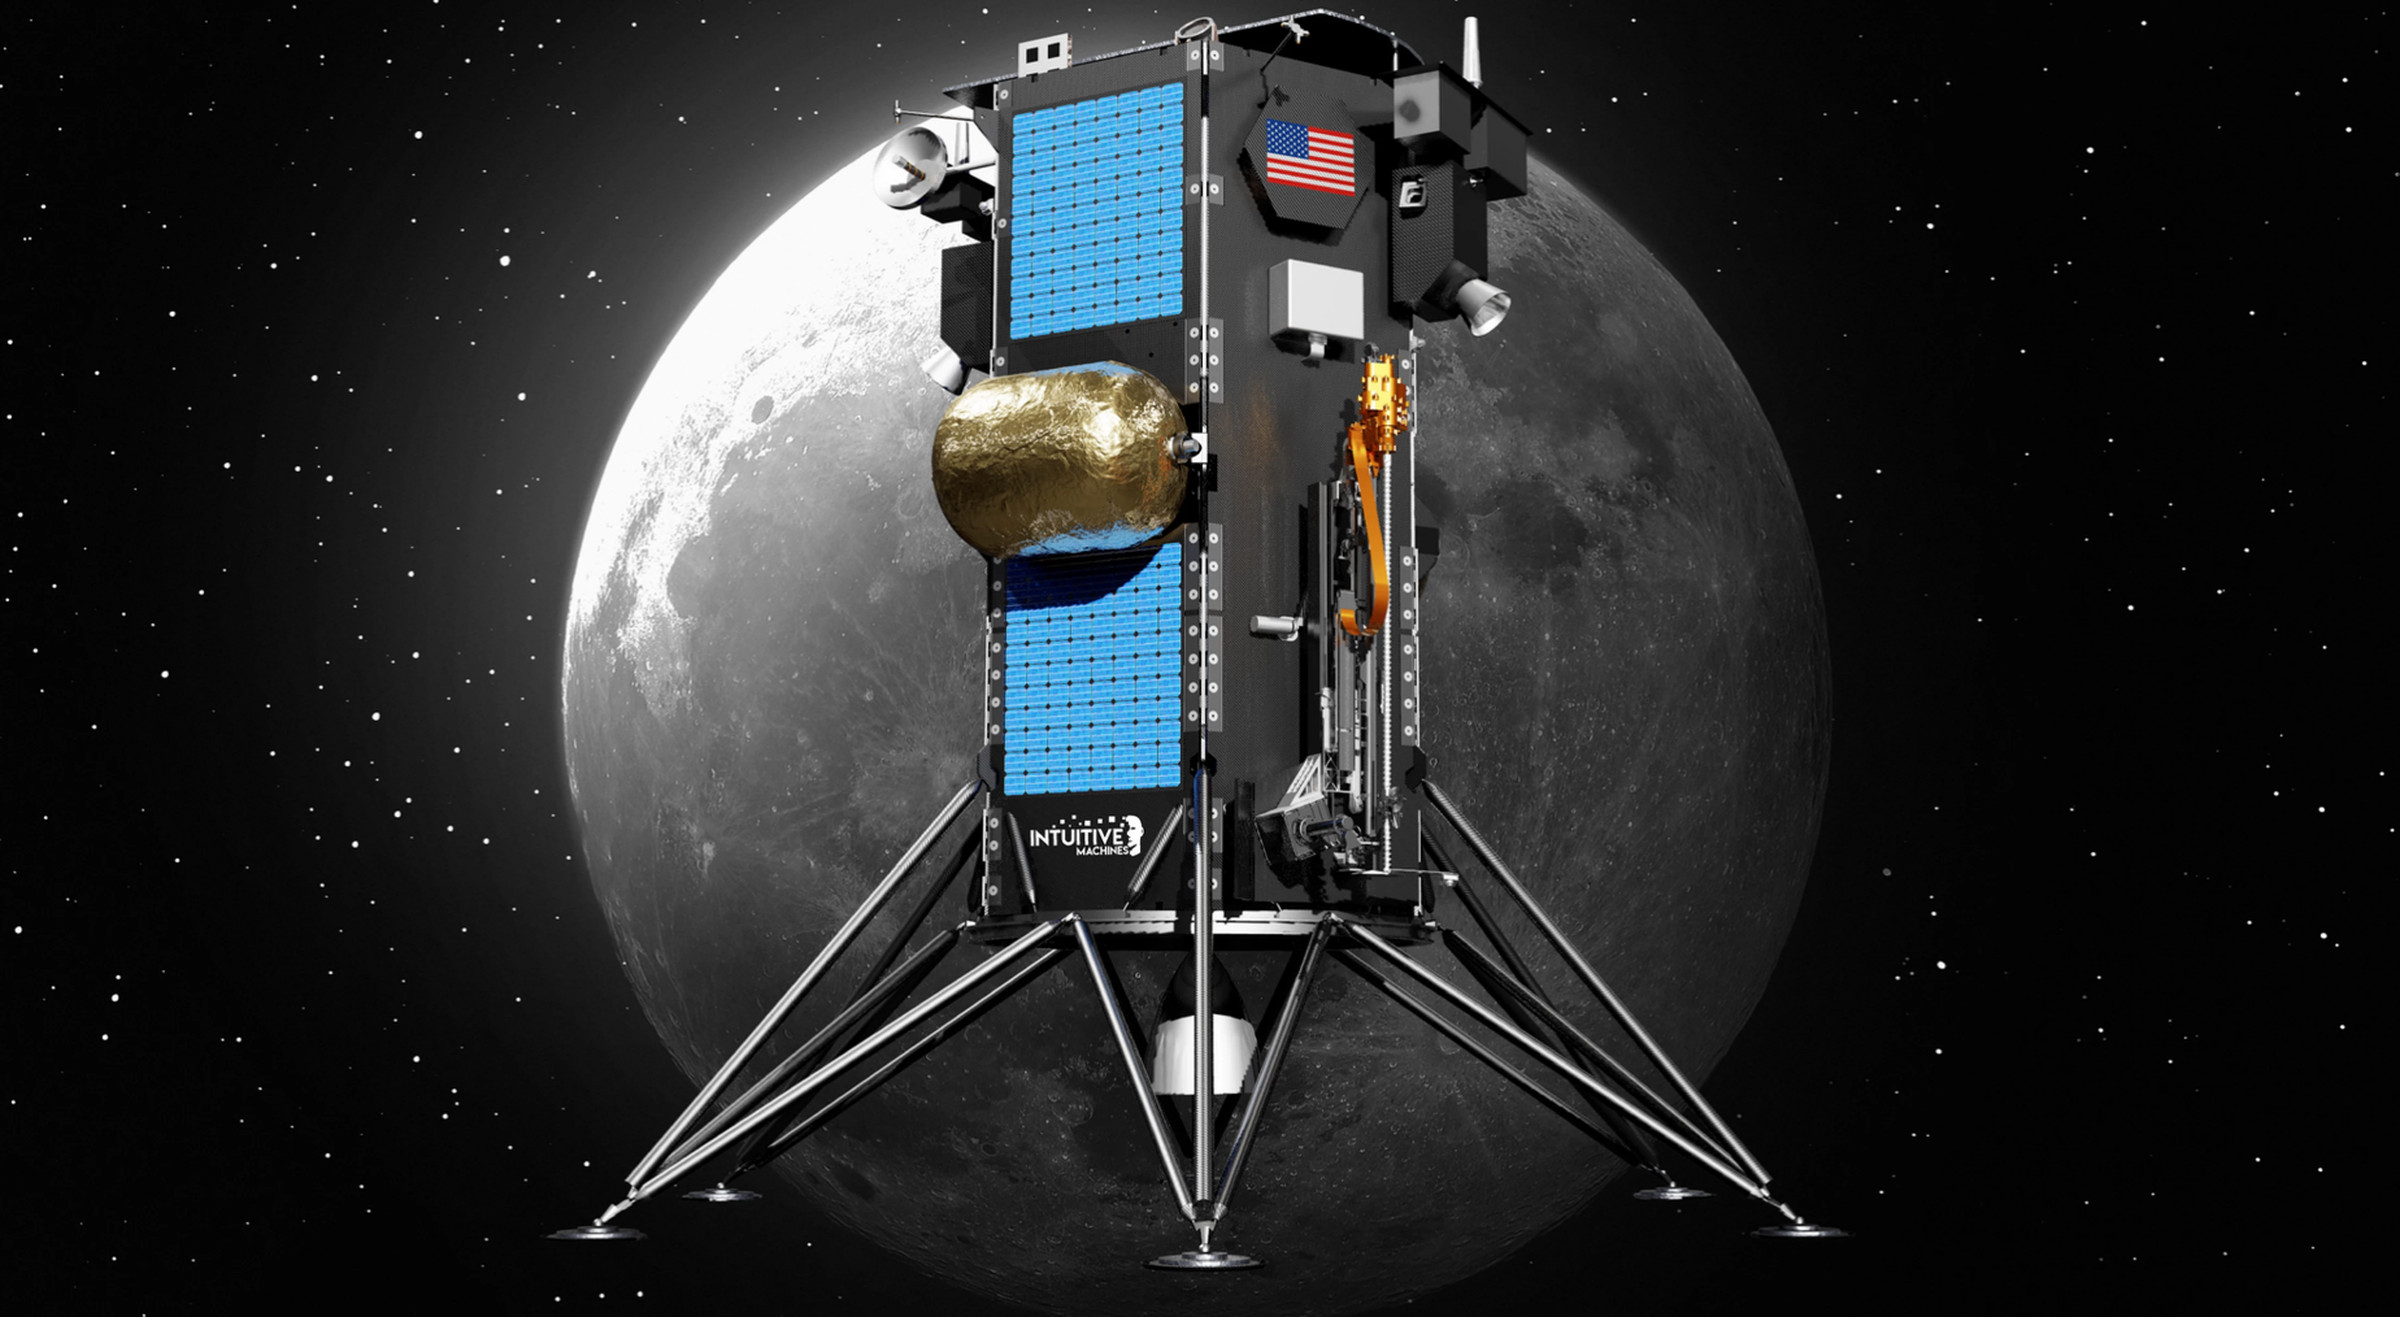 Intuitive Machines’ Nova-C lunar lander, which will carry NASA’s Polar Resources Ice Mining Experiment (PRIME-1) drill to the Moon for NASA in 2022.